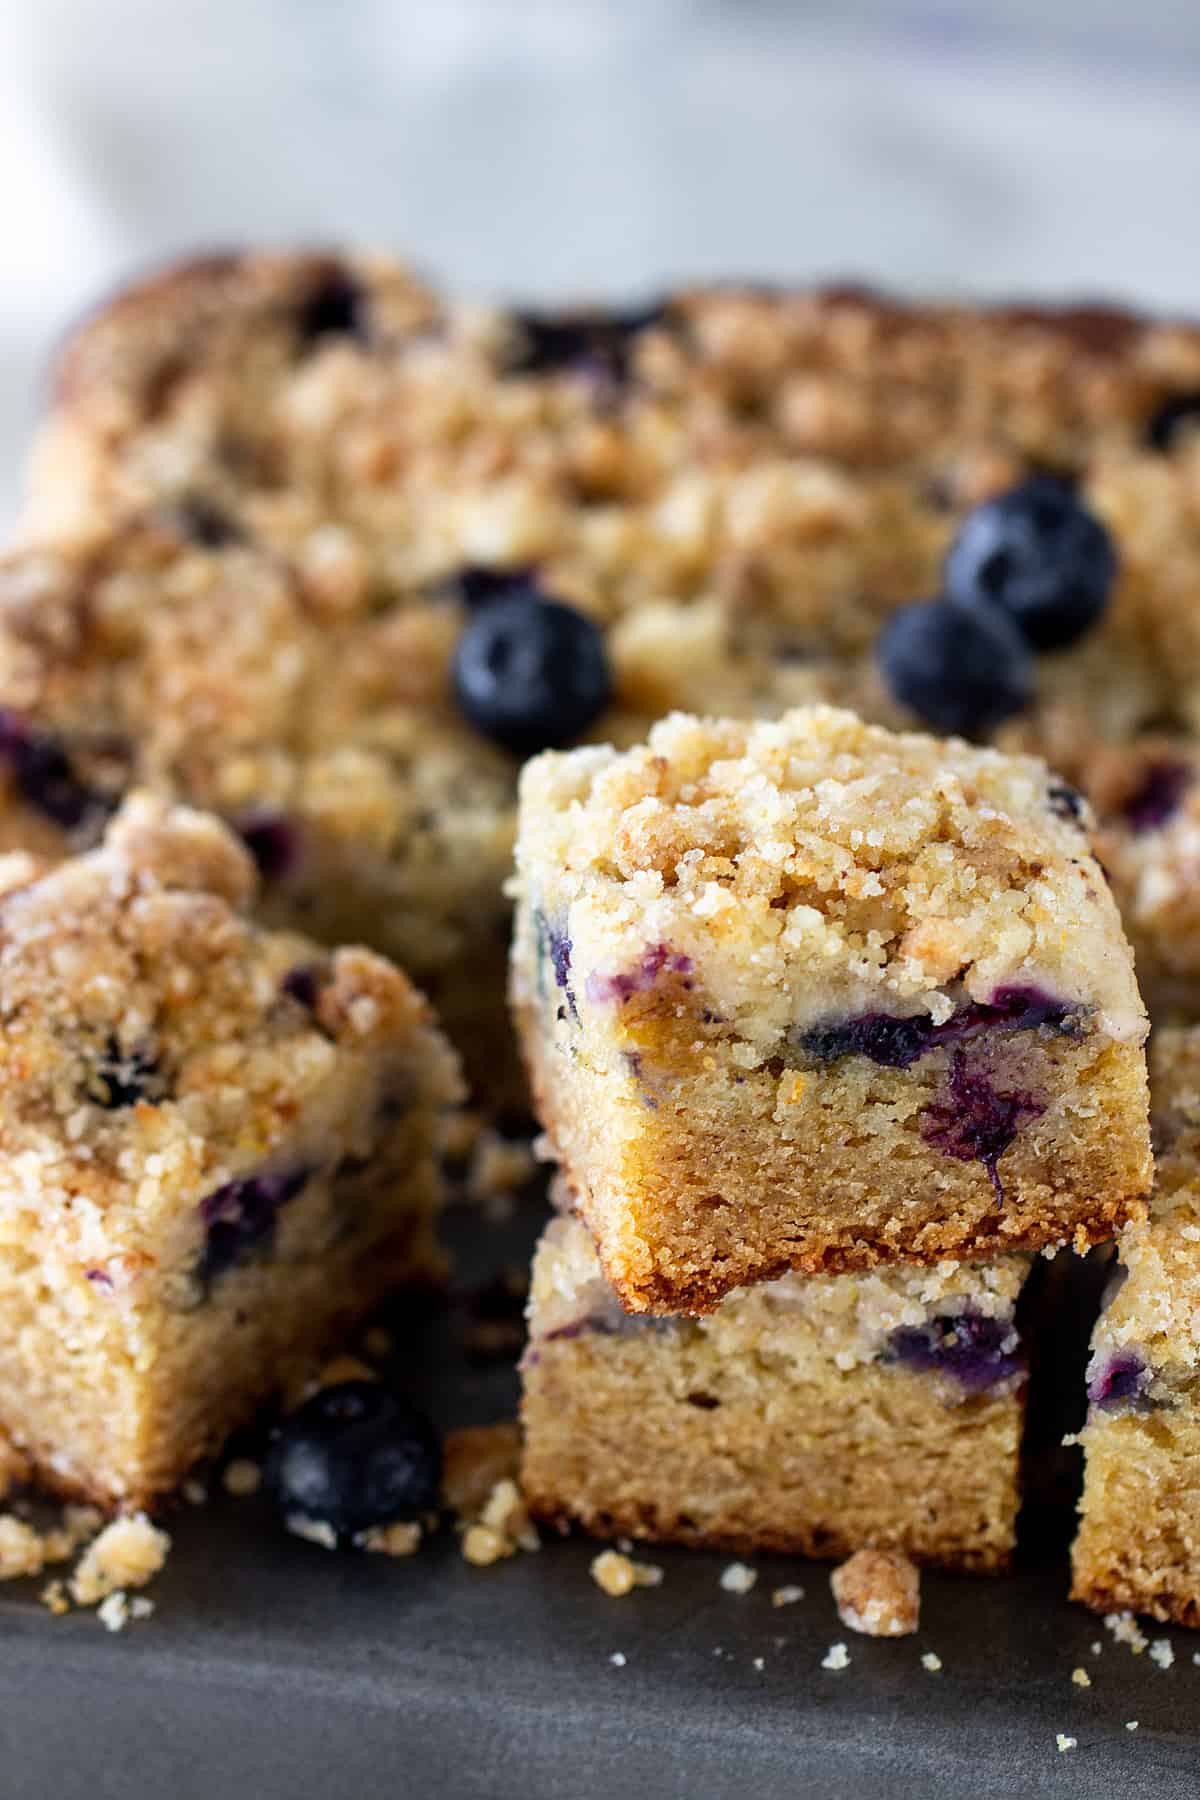 Squares of lemon cake with blueberries on metal surface, loose berries